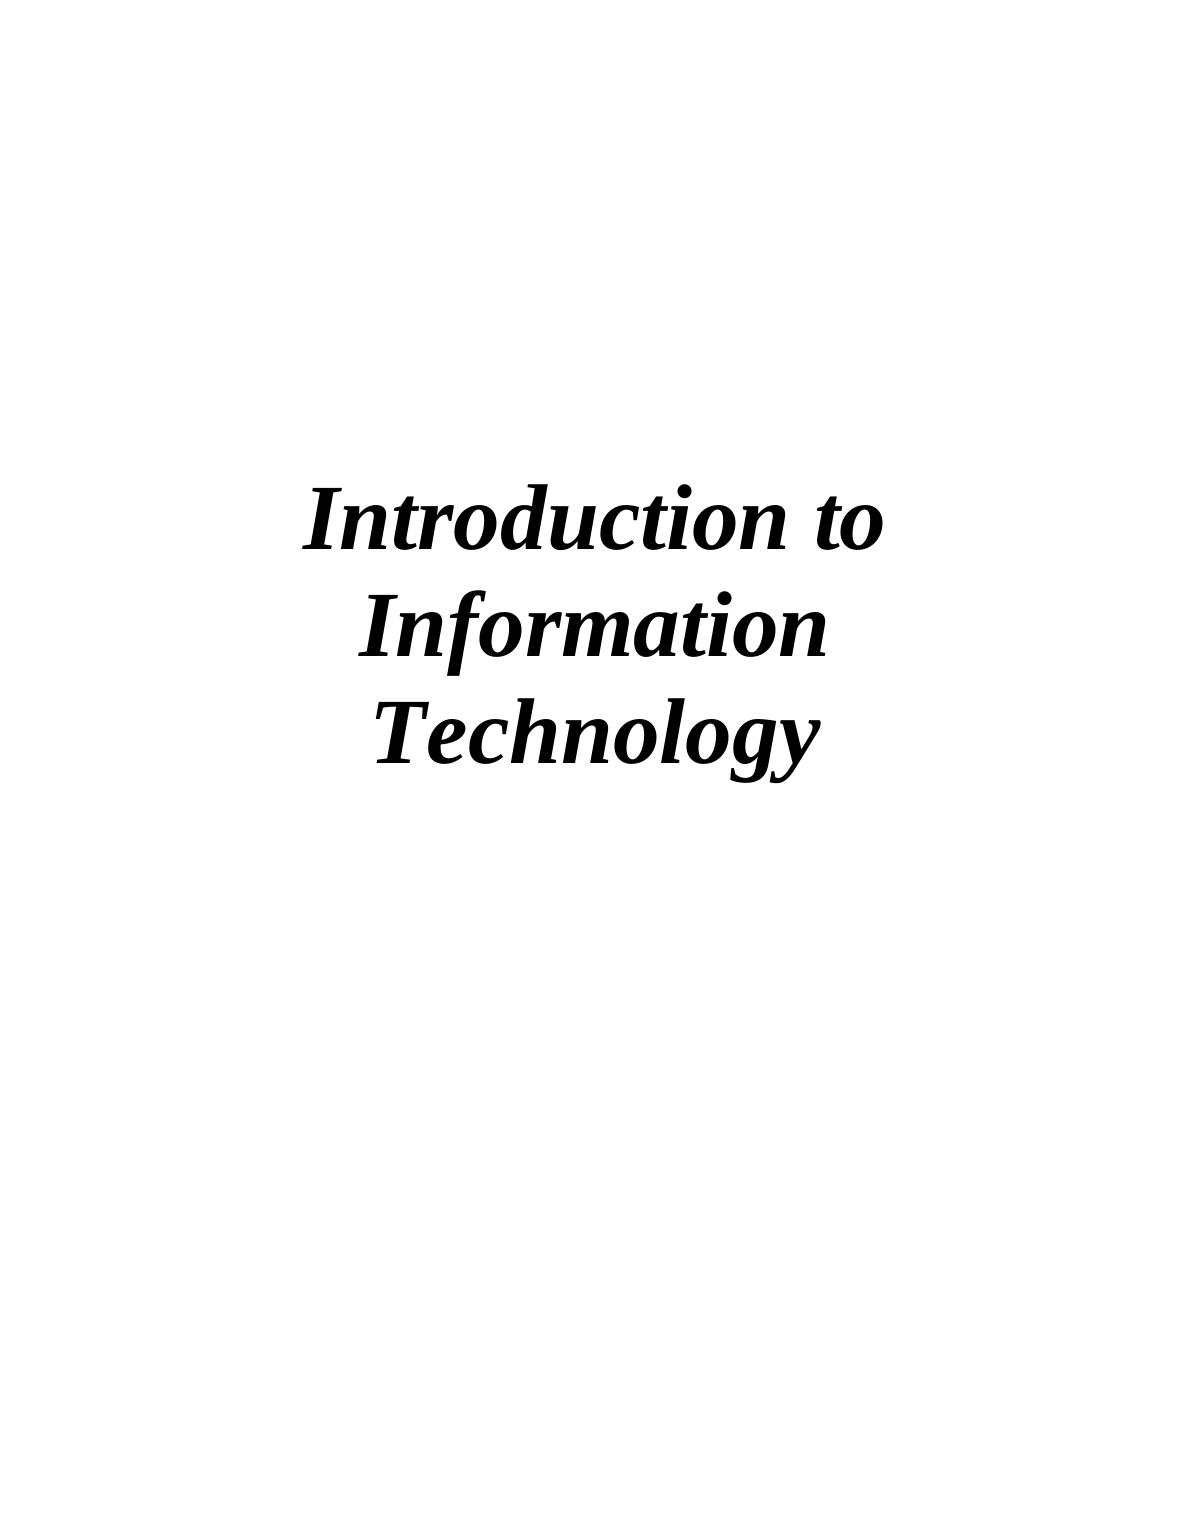 Introduction to Information Technology - Morrison_1